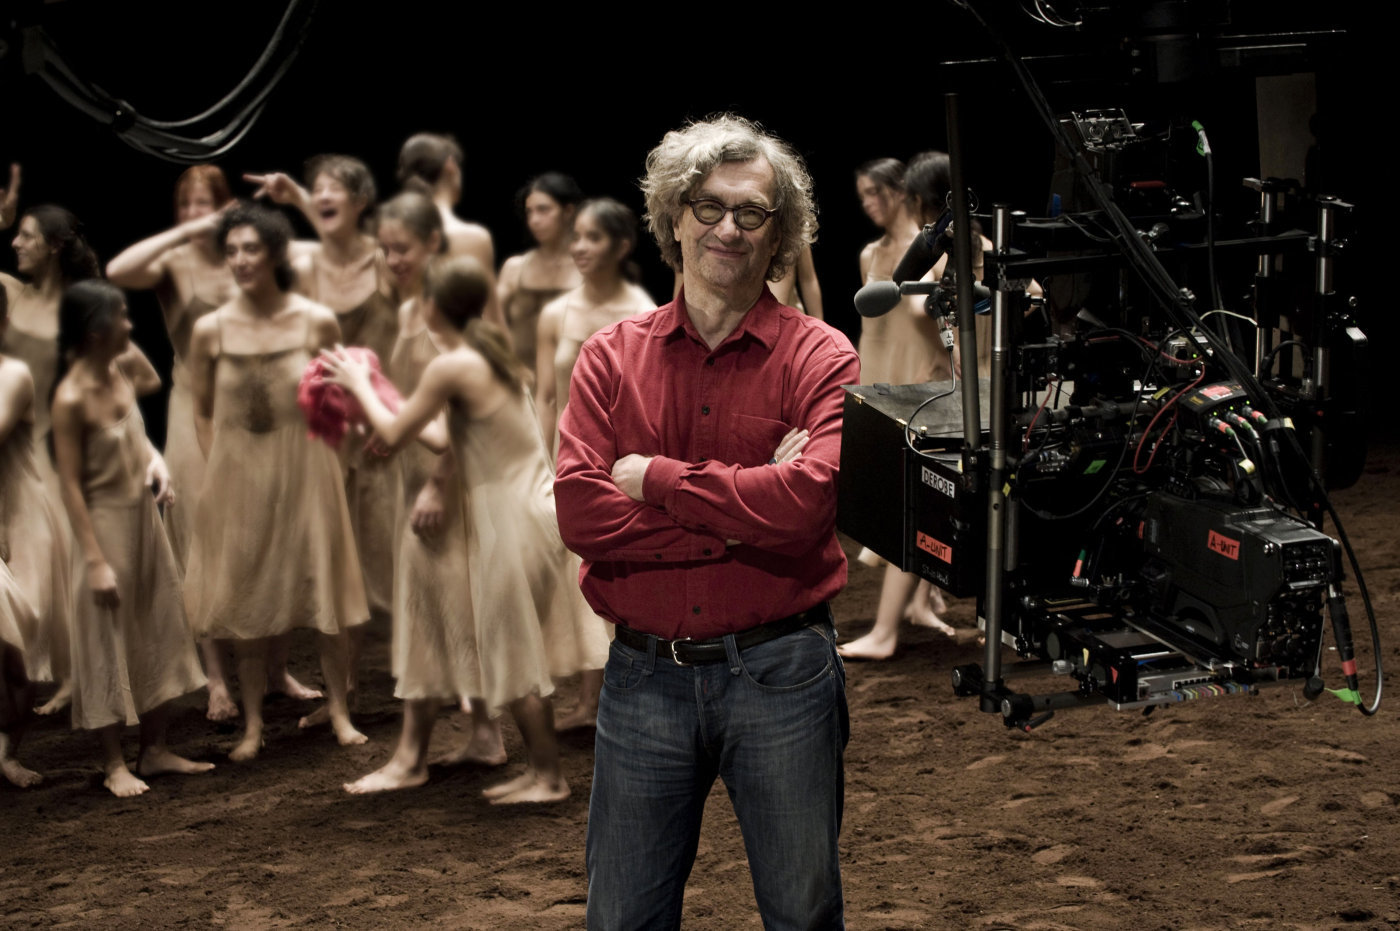  Wim Wenders sur le tournage du documentaire Pina / © Donata Wenders